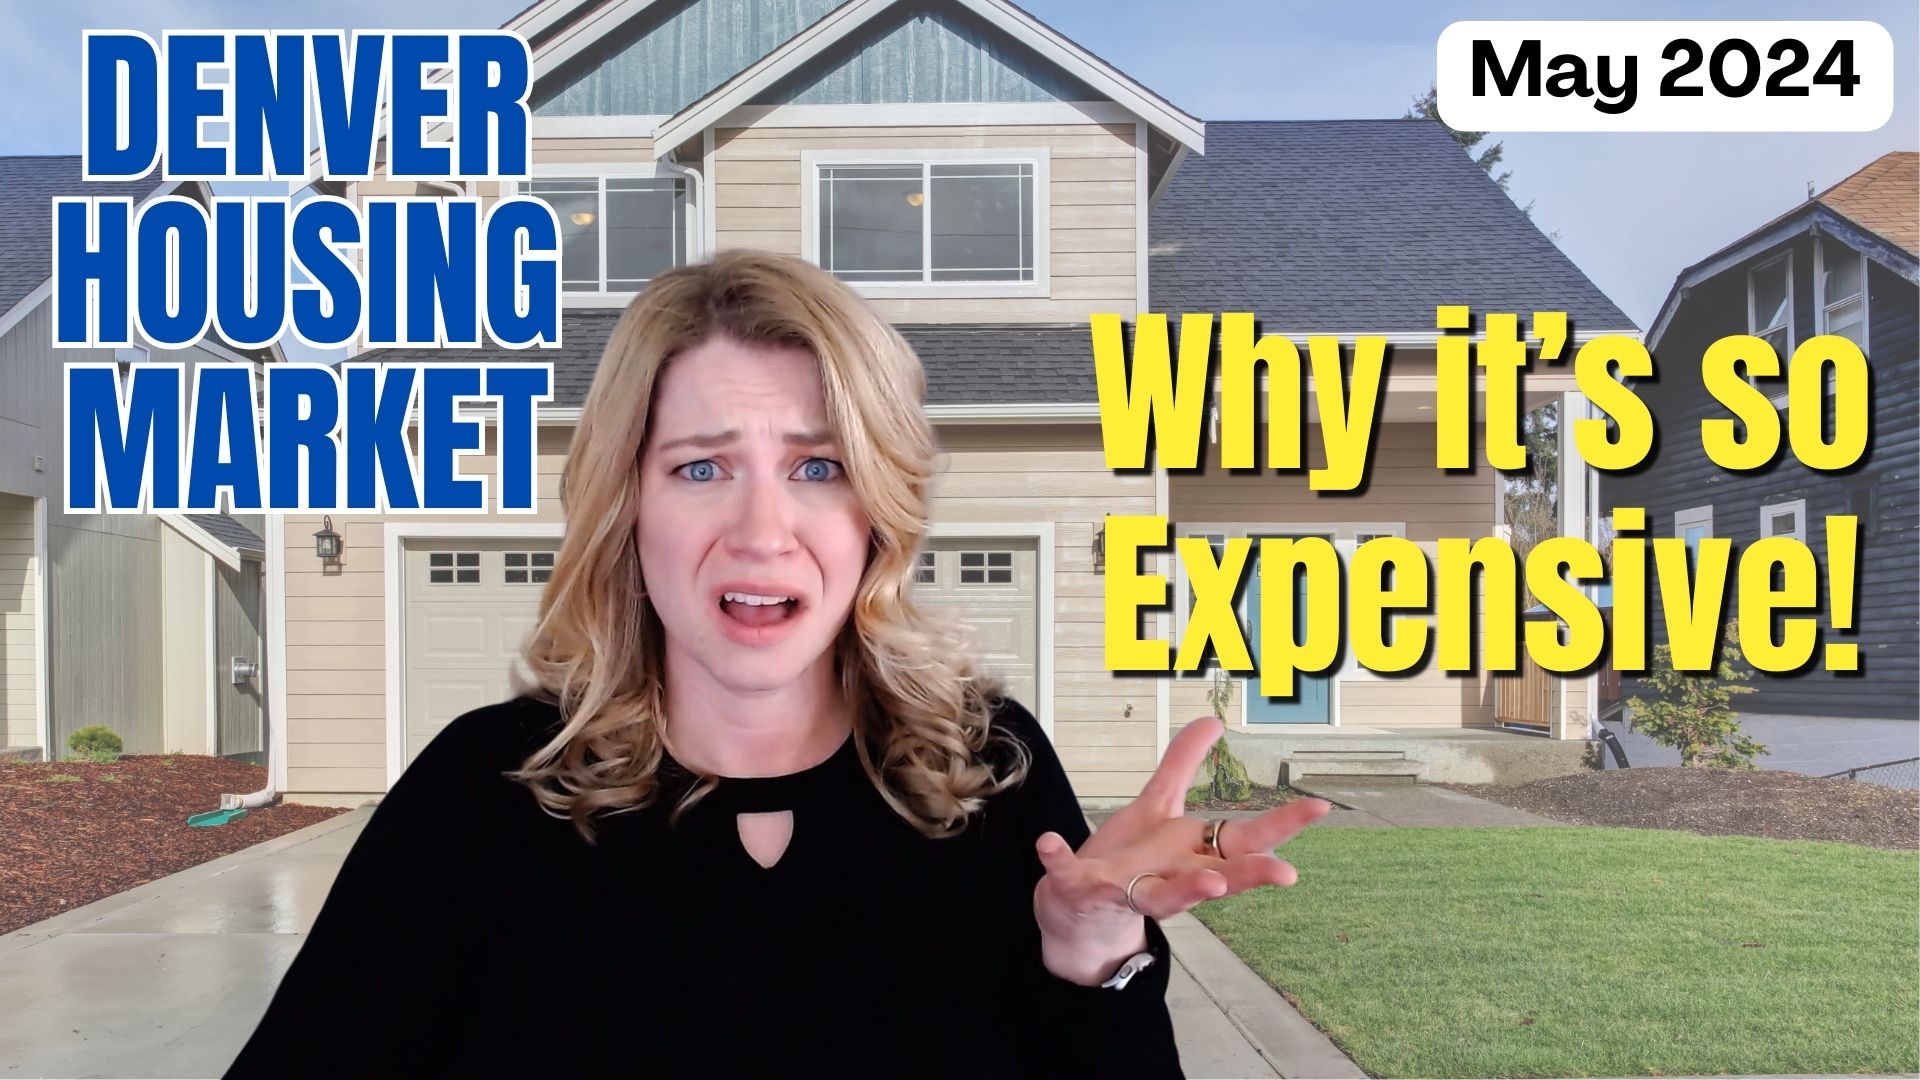 Shocked lady in front of a house saying "why it's so expensive!"